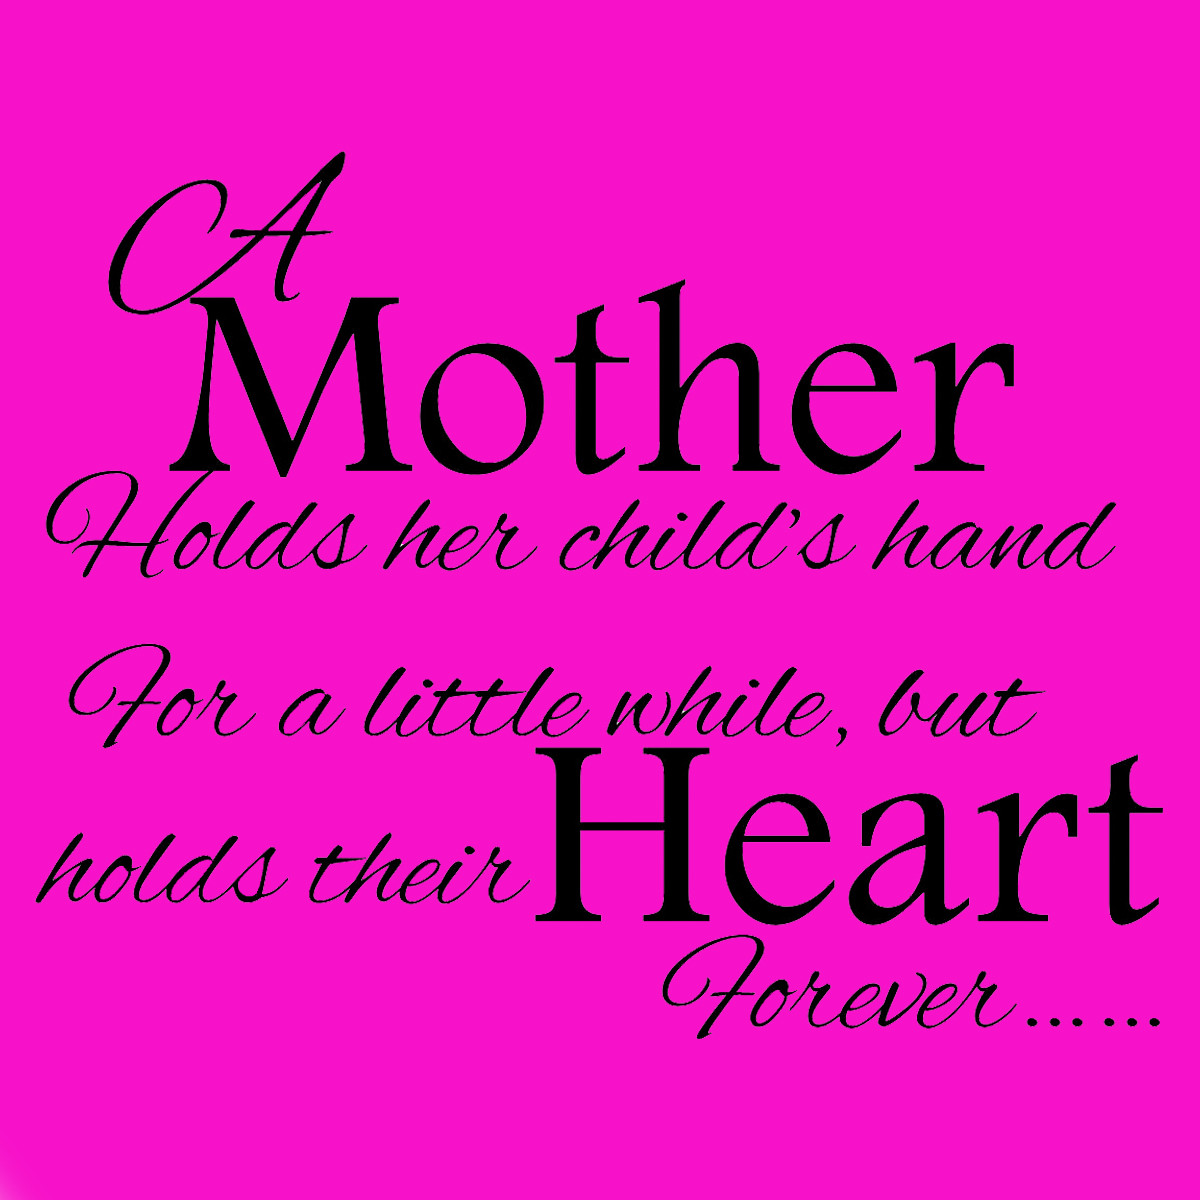 Mothers Day Sayings And Quotes
 Mothers Day Quotes For QuotesGram